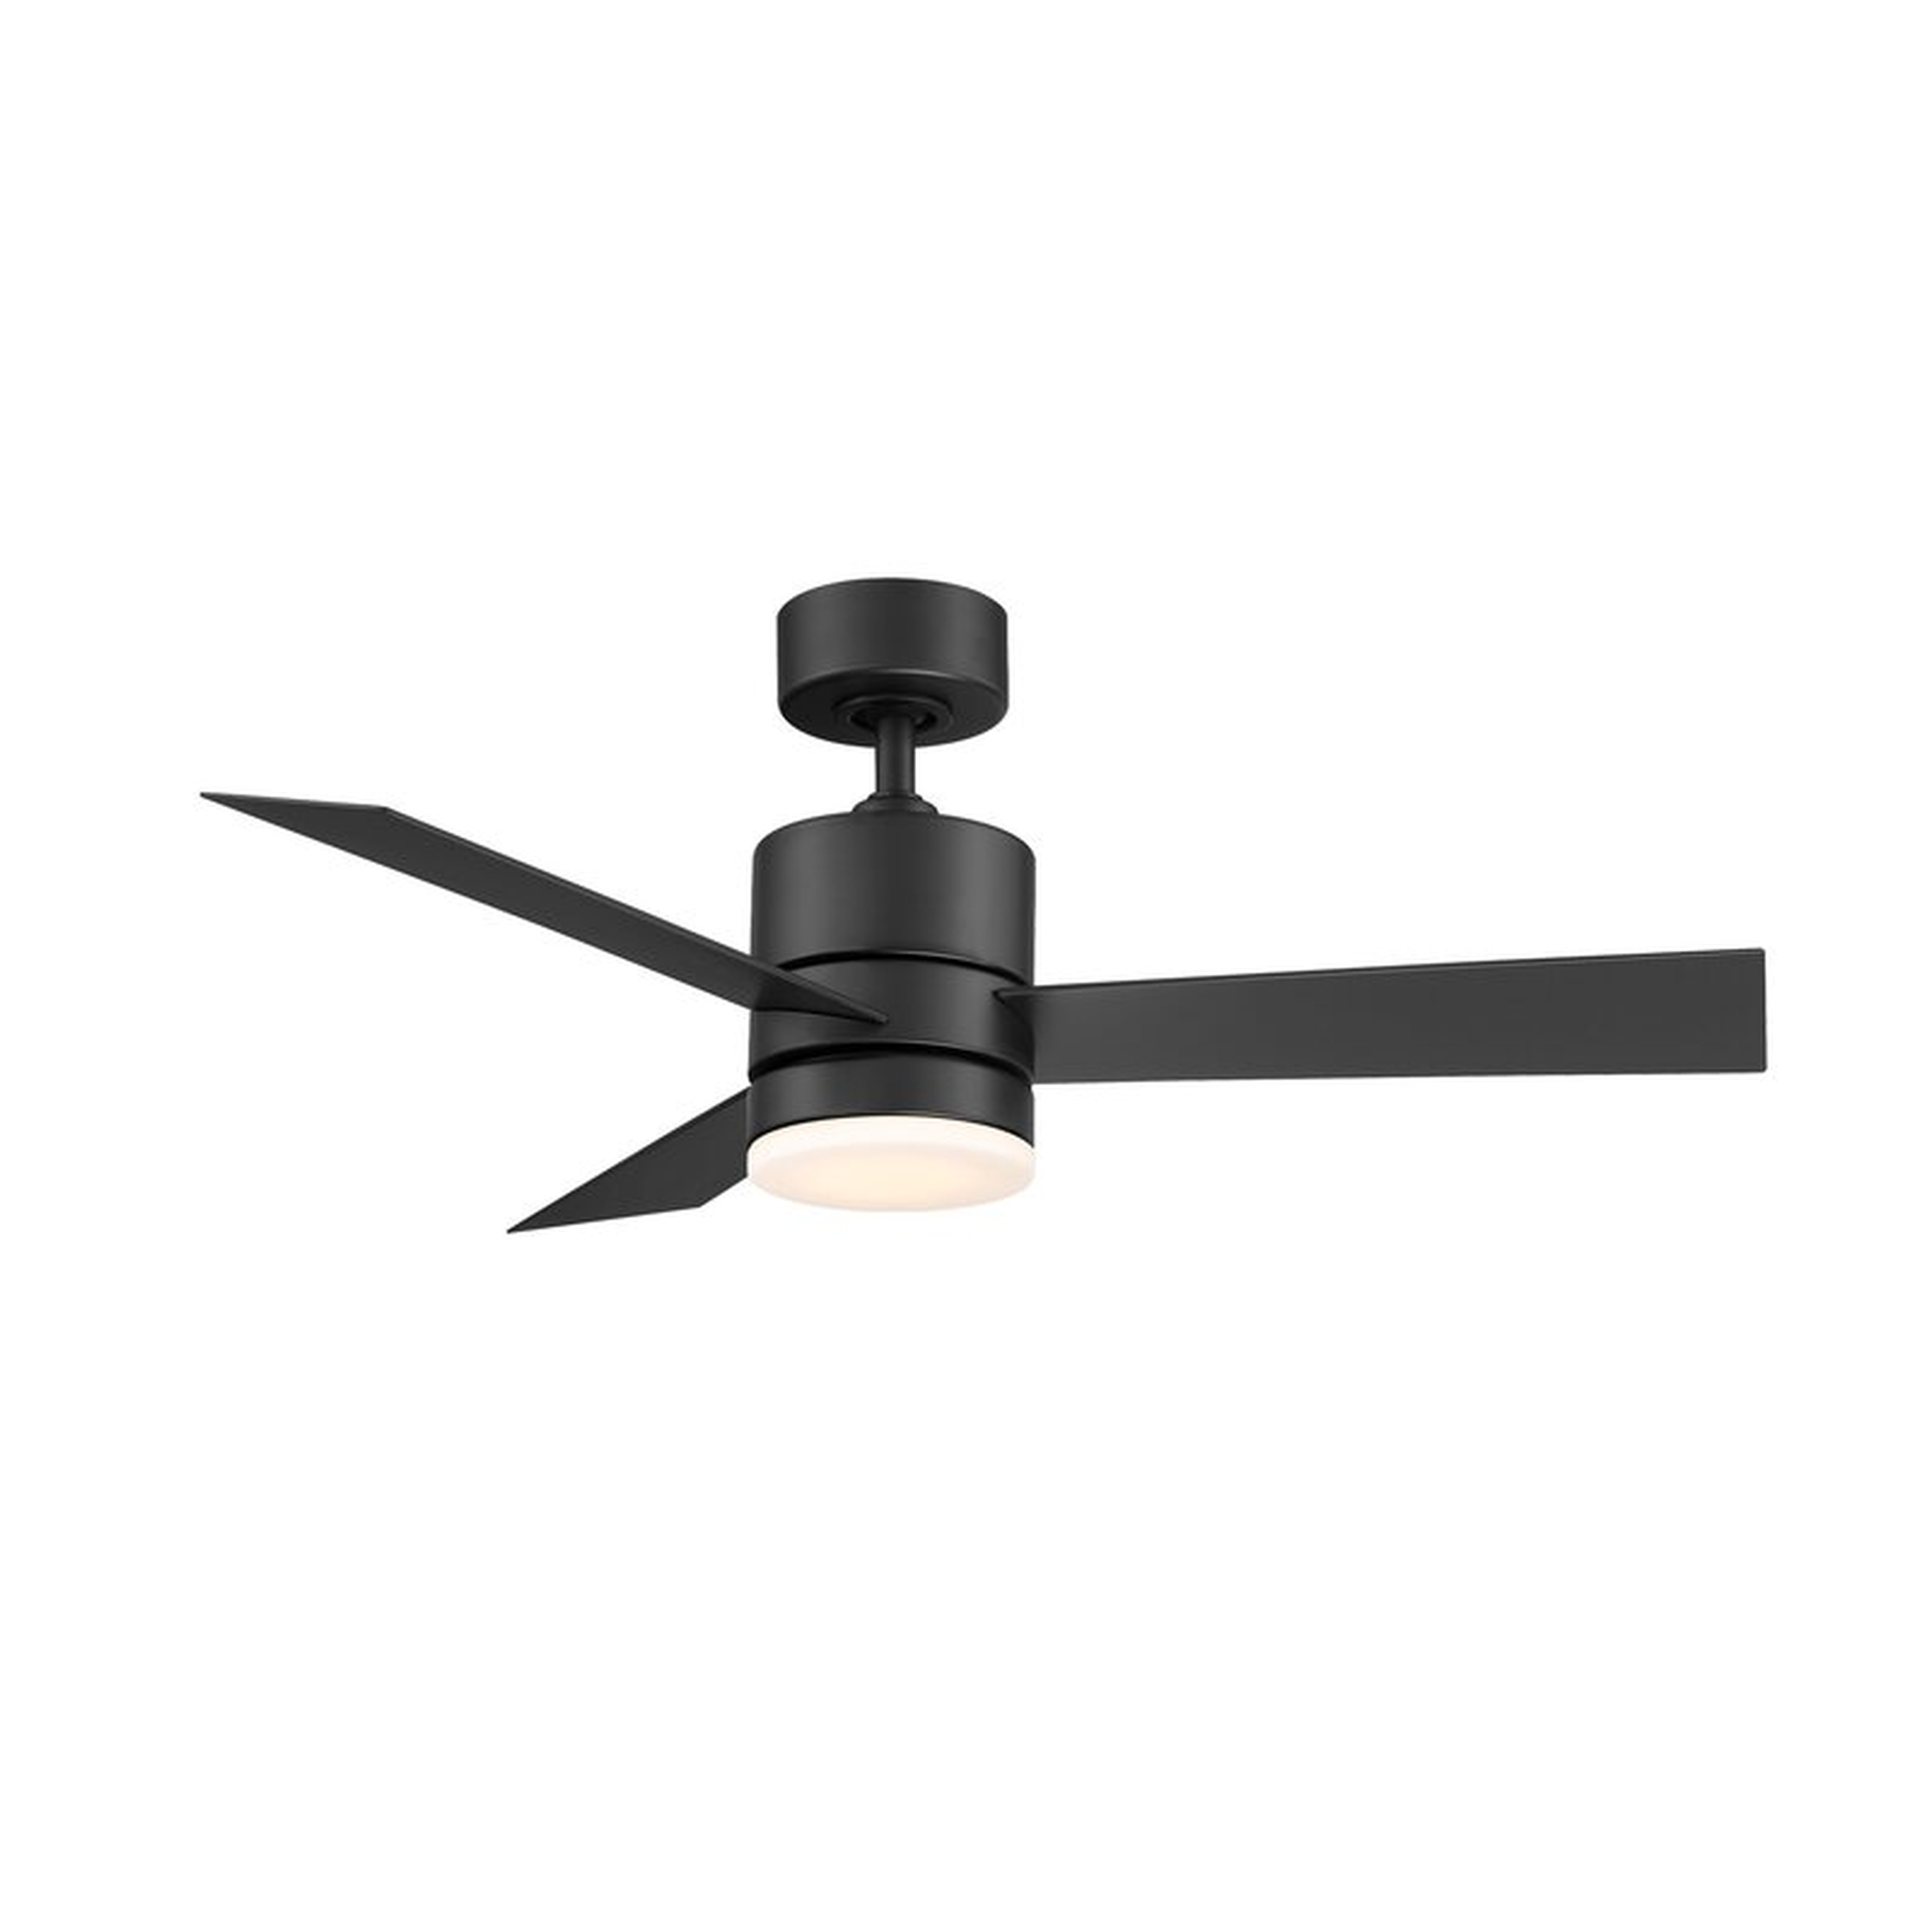 44'' Axis 3 - Blade Outdoor LED Smart Standard Ceiling Fan with Remote Control and Light Kit Included - Wayfair